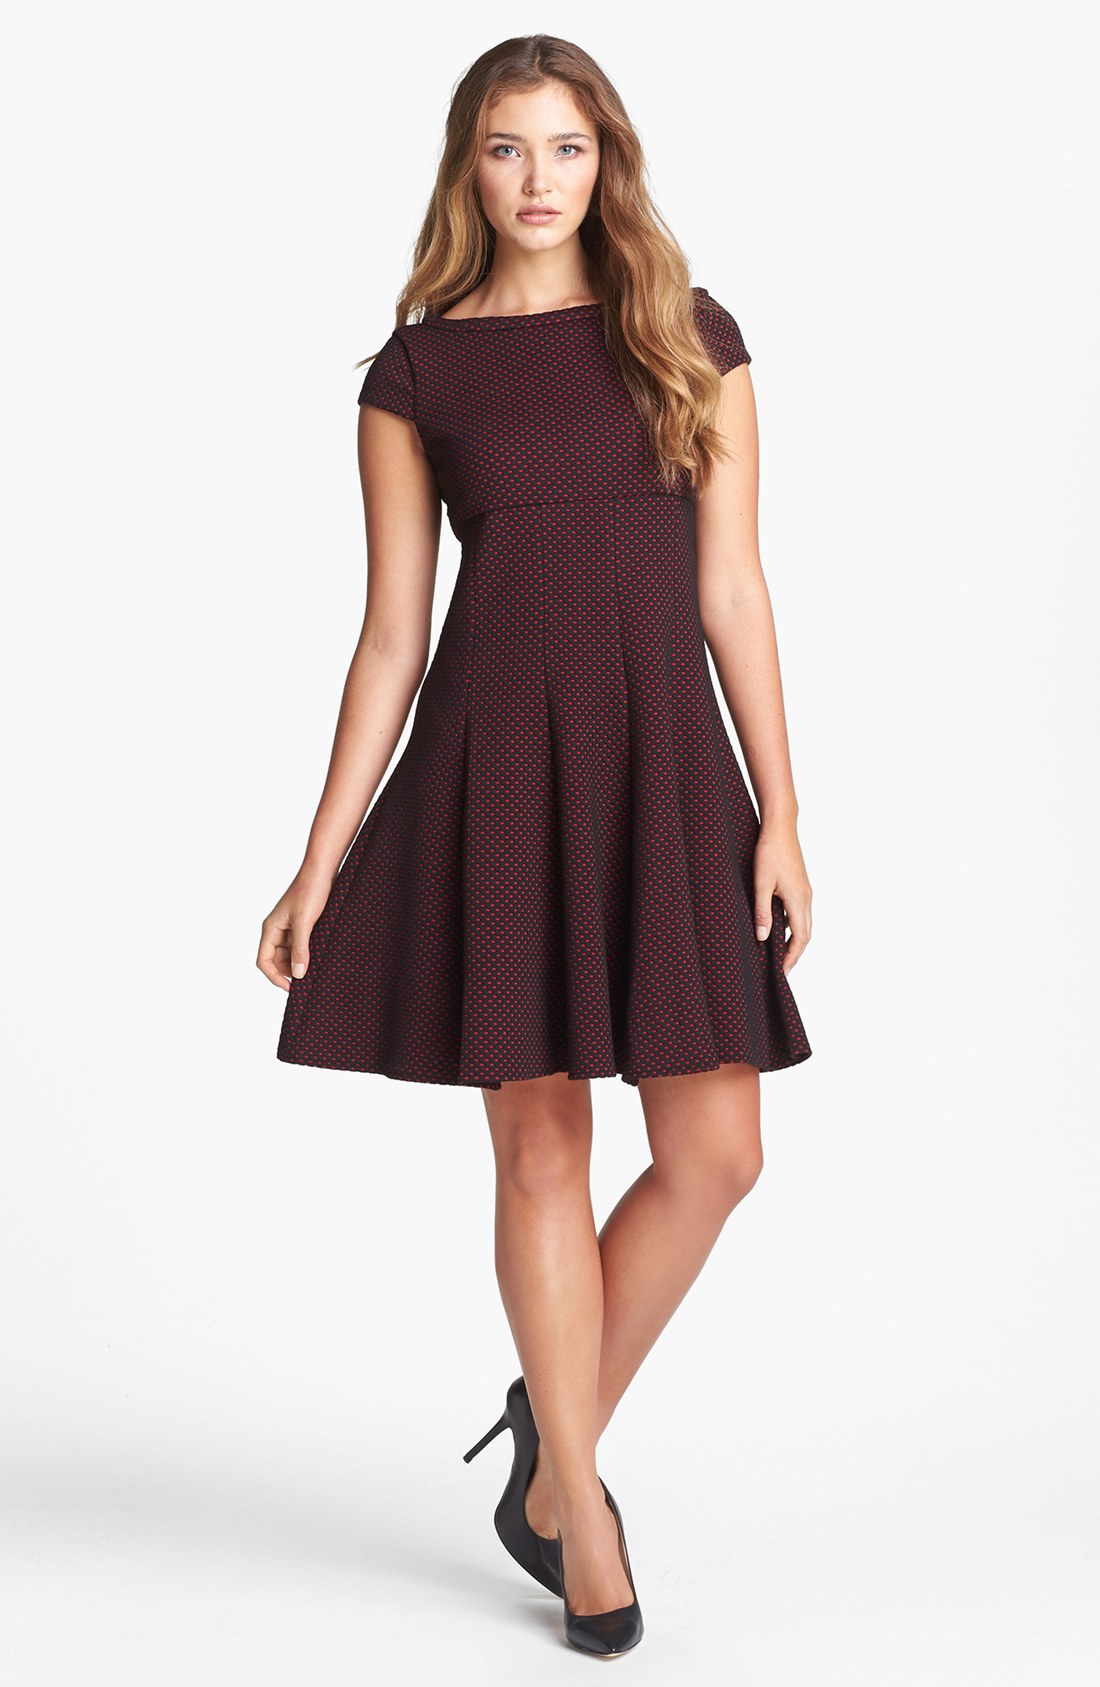 Taylor Dresses Dot Pattern Fit Flare Dress in Red (Red/ Black) | Lyst